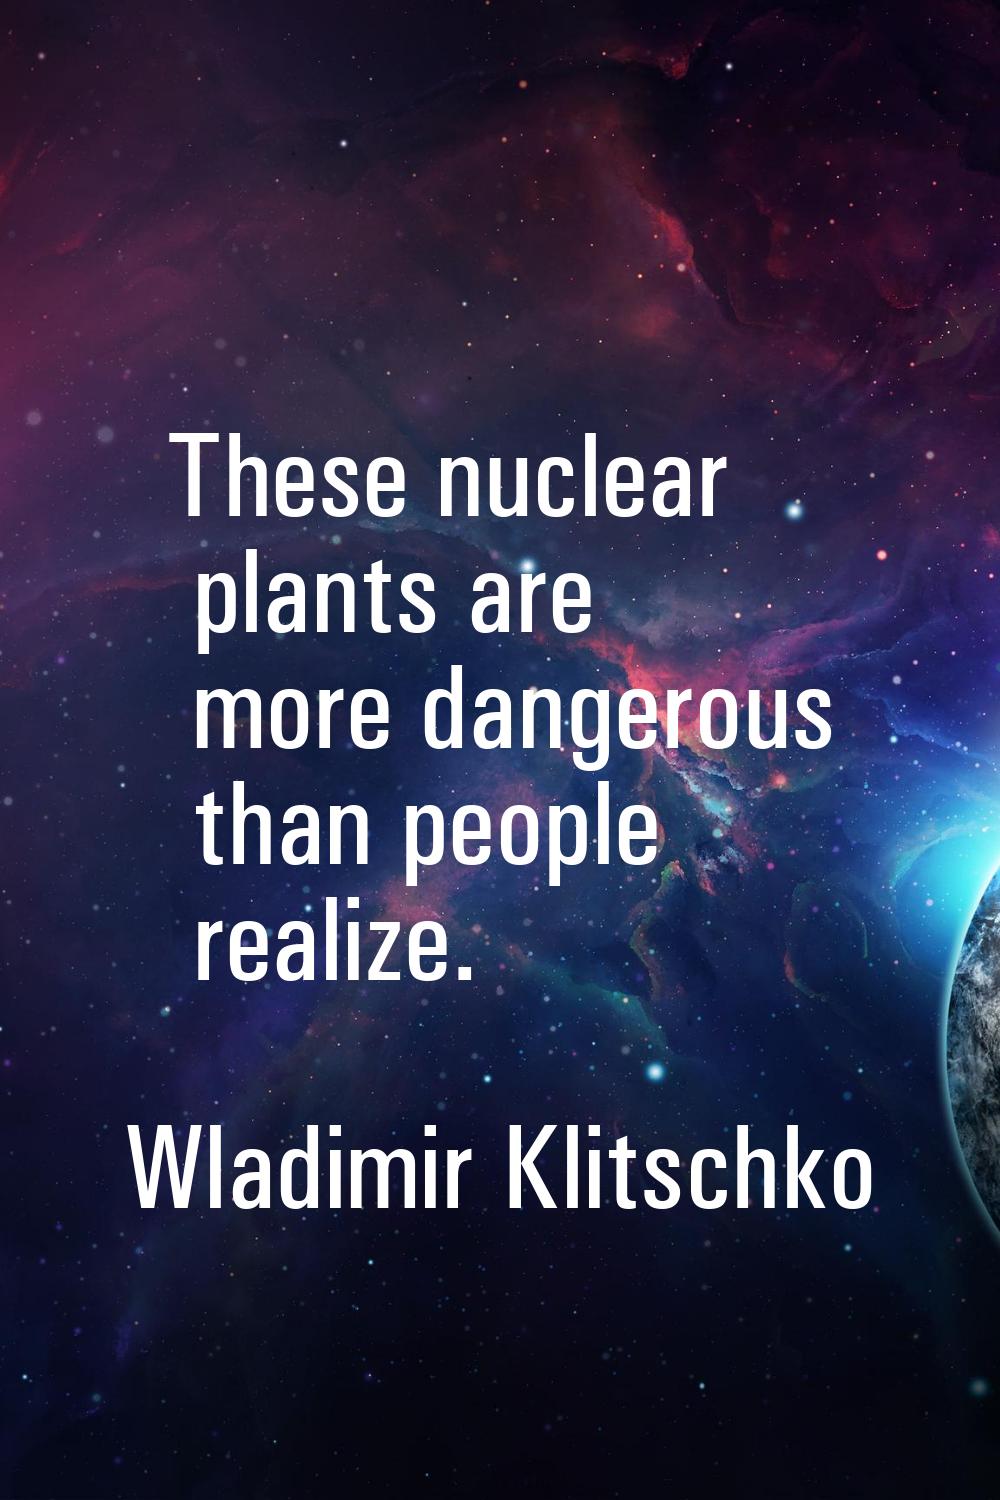 These nuclear plants are more dangerous than people realize.